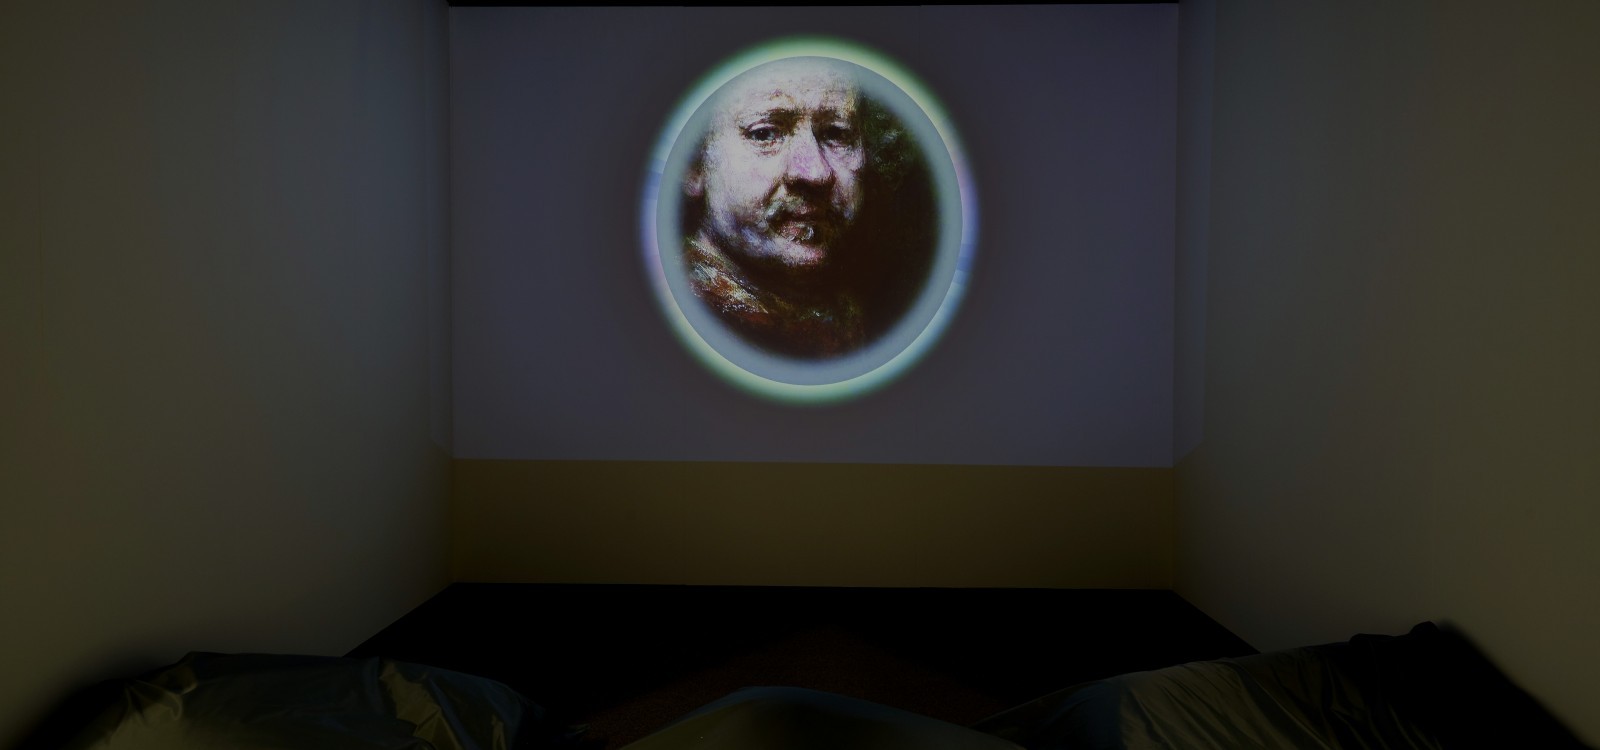 Suzanne Treister, The Holographic Universe Theory Of Art History (THUTOAH), 2021. Installation view at the University Library of KU Leuven. Photo by Dirk Pauwels. Courtesy of KU Leuven